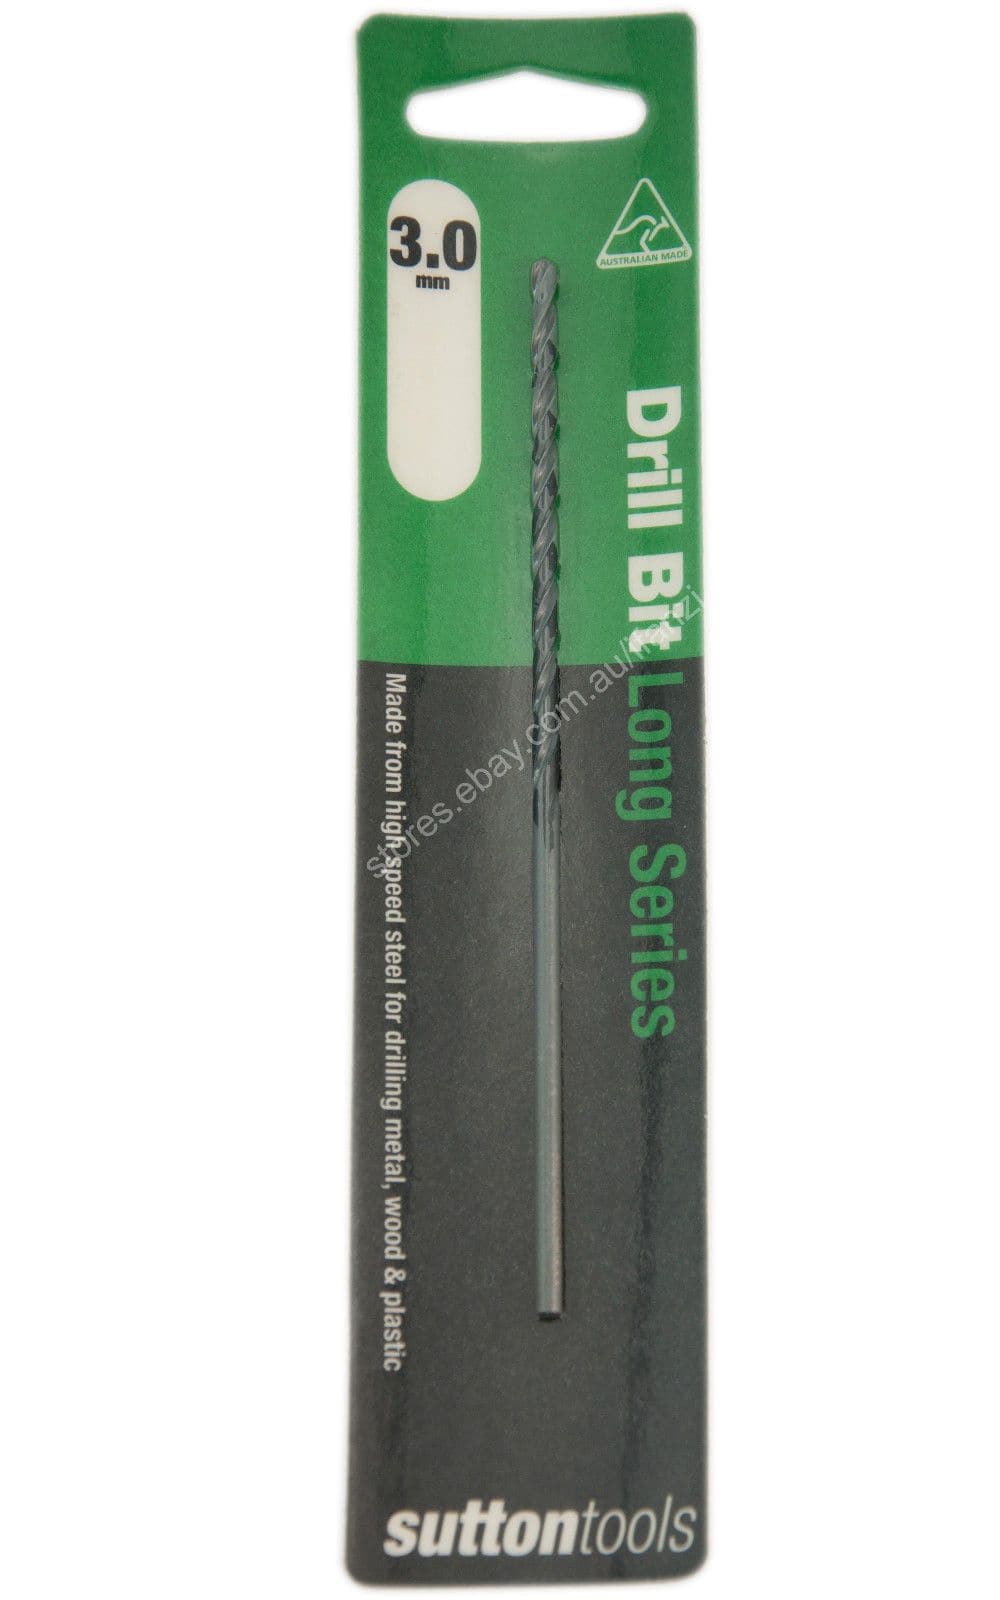 suttontools Metric HSS Long Series Drill Bits For Metal, Wood, Plastic 3mm - Double Bay Hardware